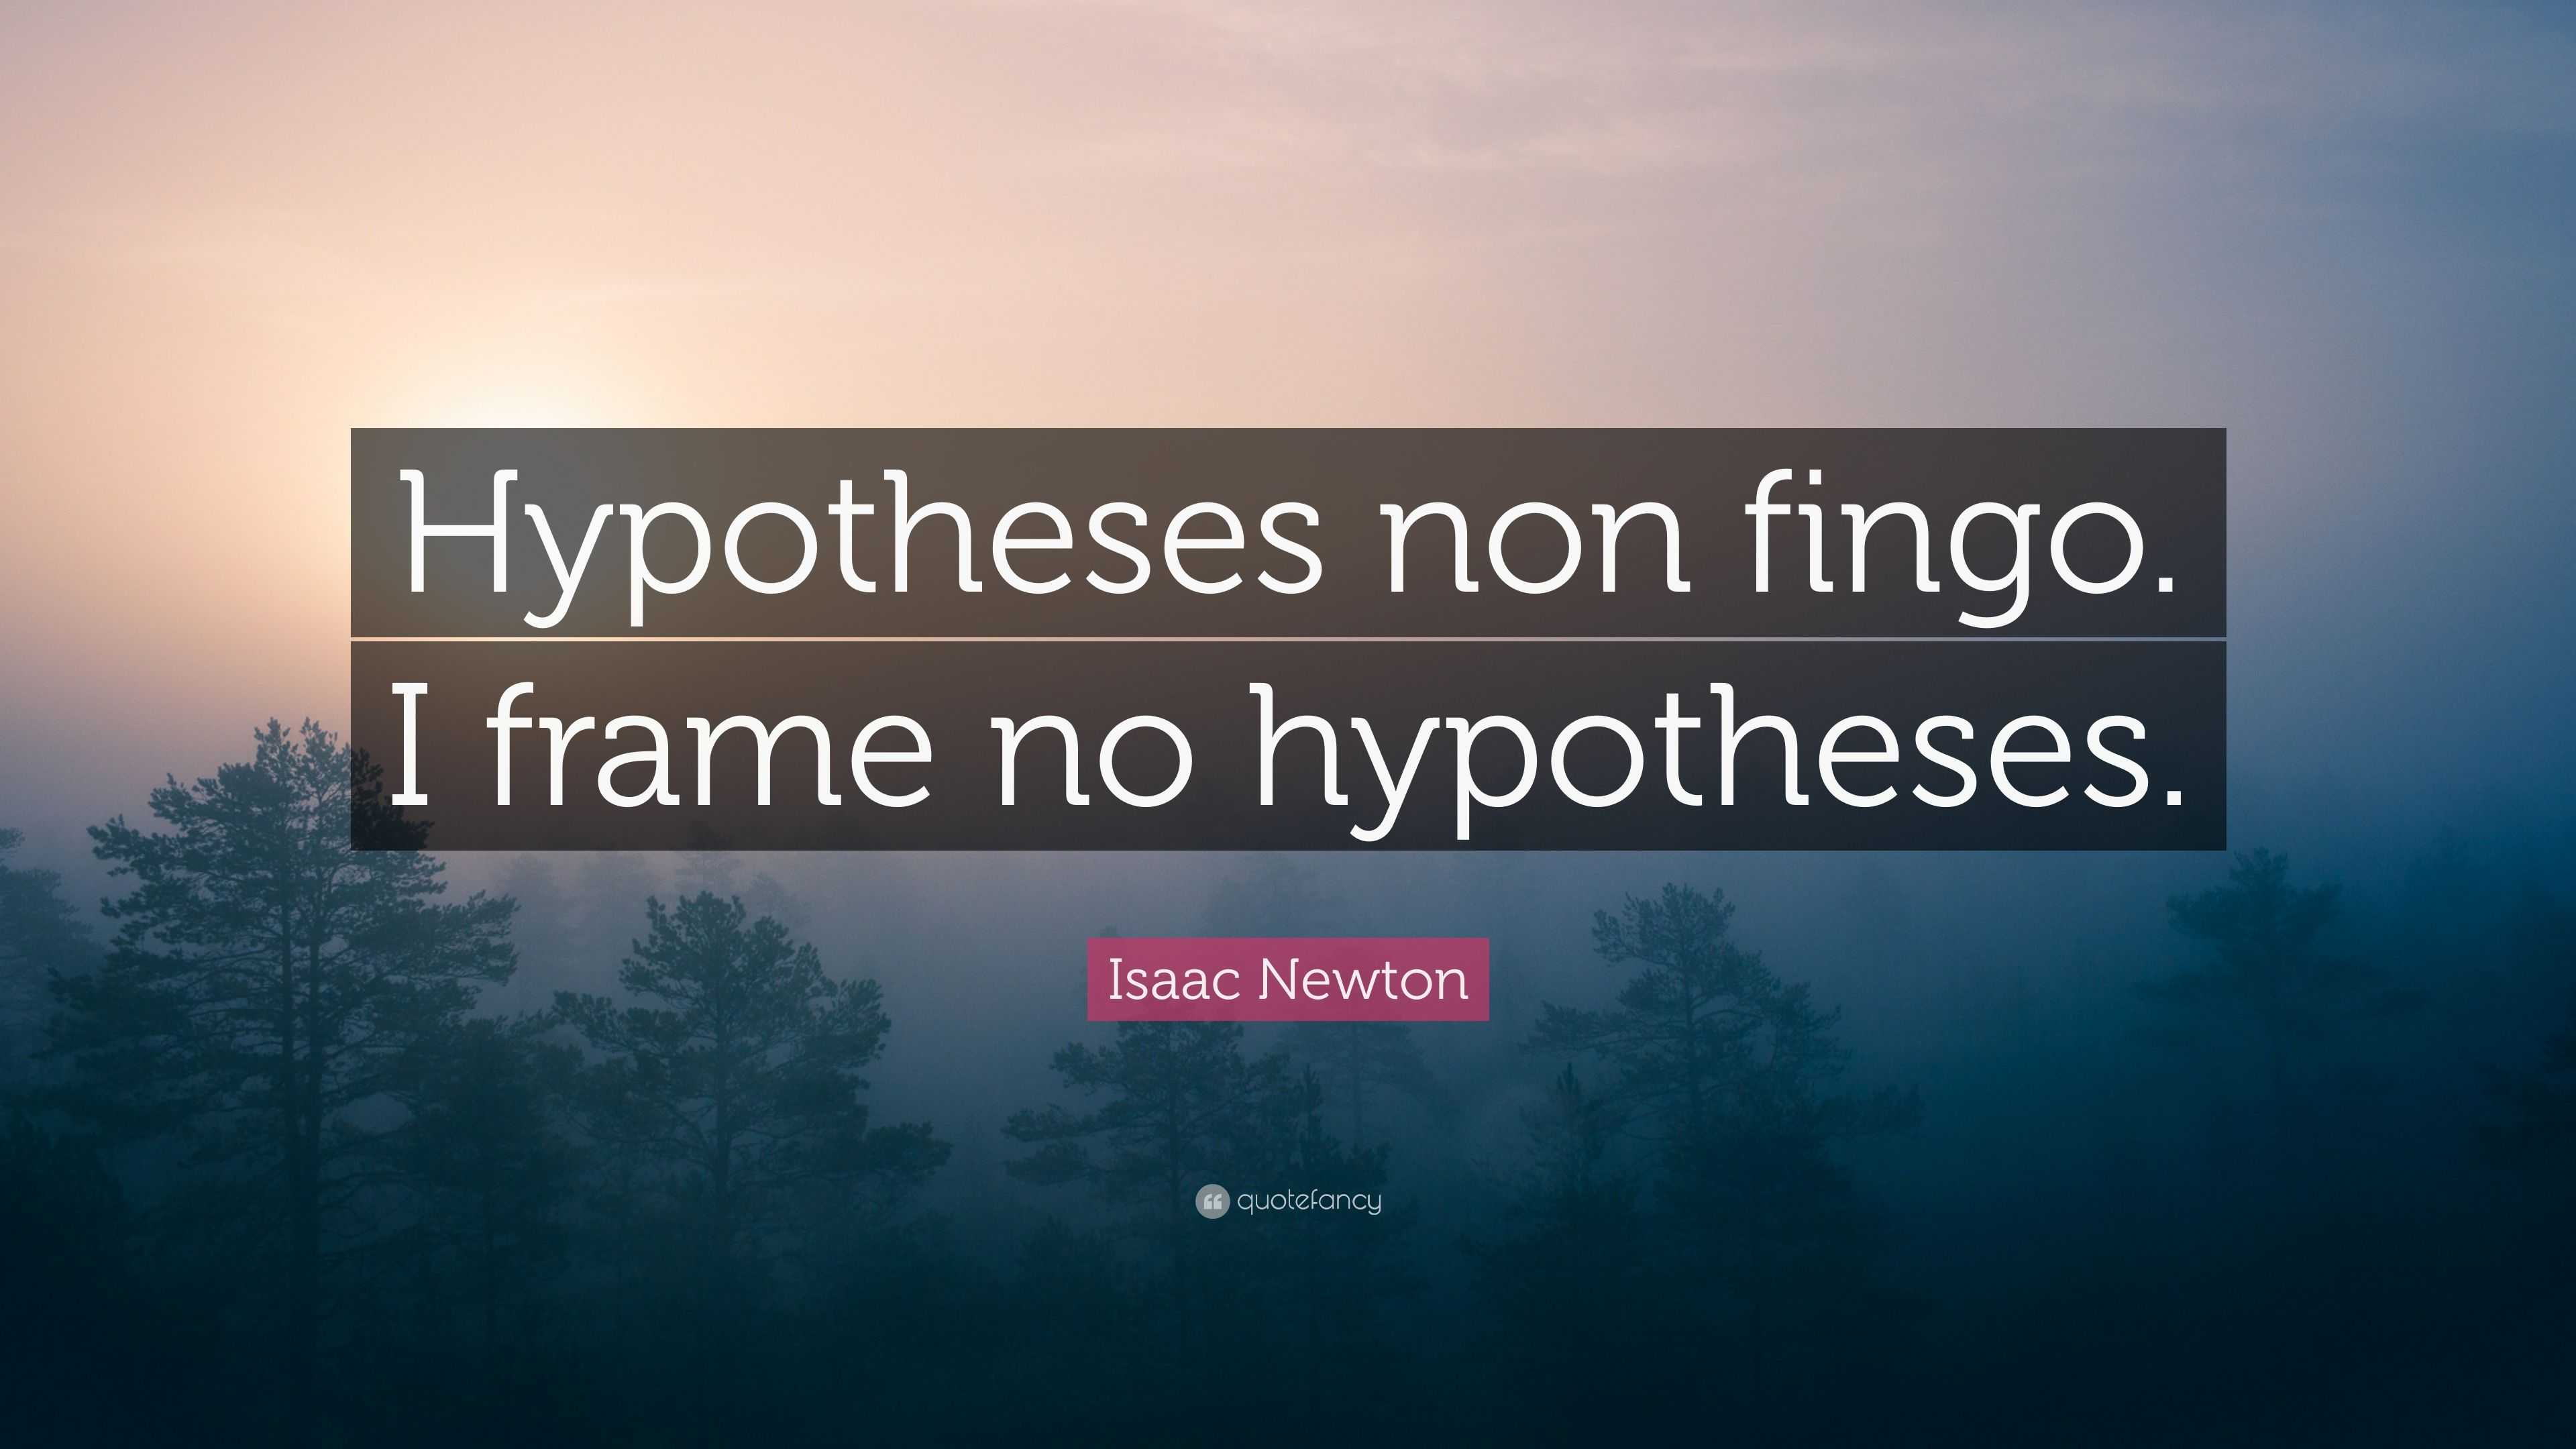 meaning of hypothesis non fingo